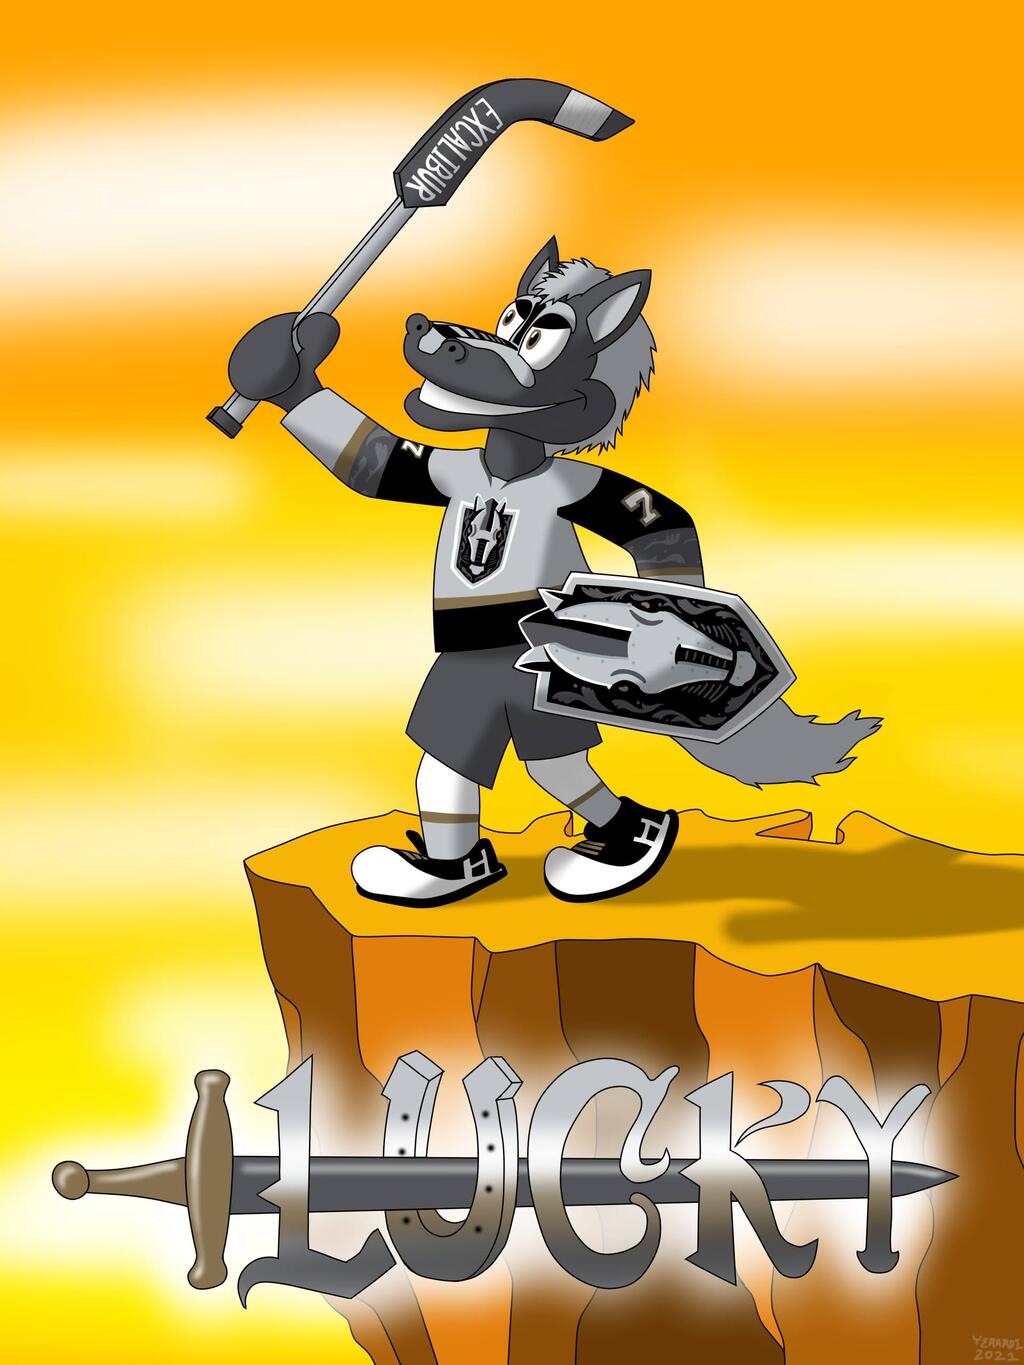 AHL MAX: Lucky - Henderson Silver Knights